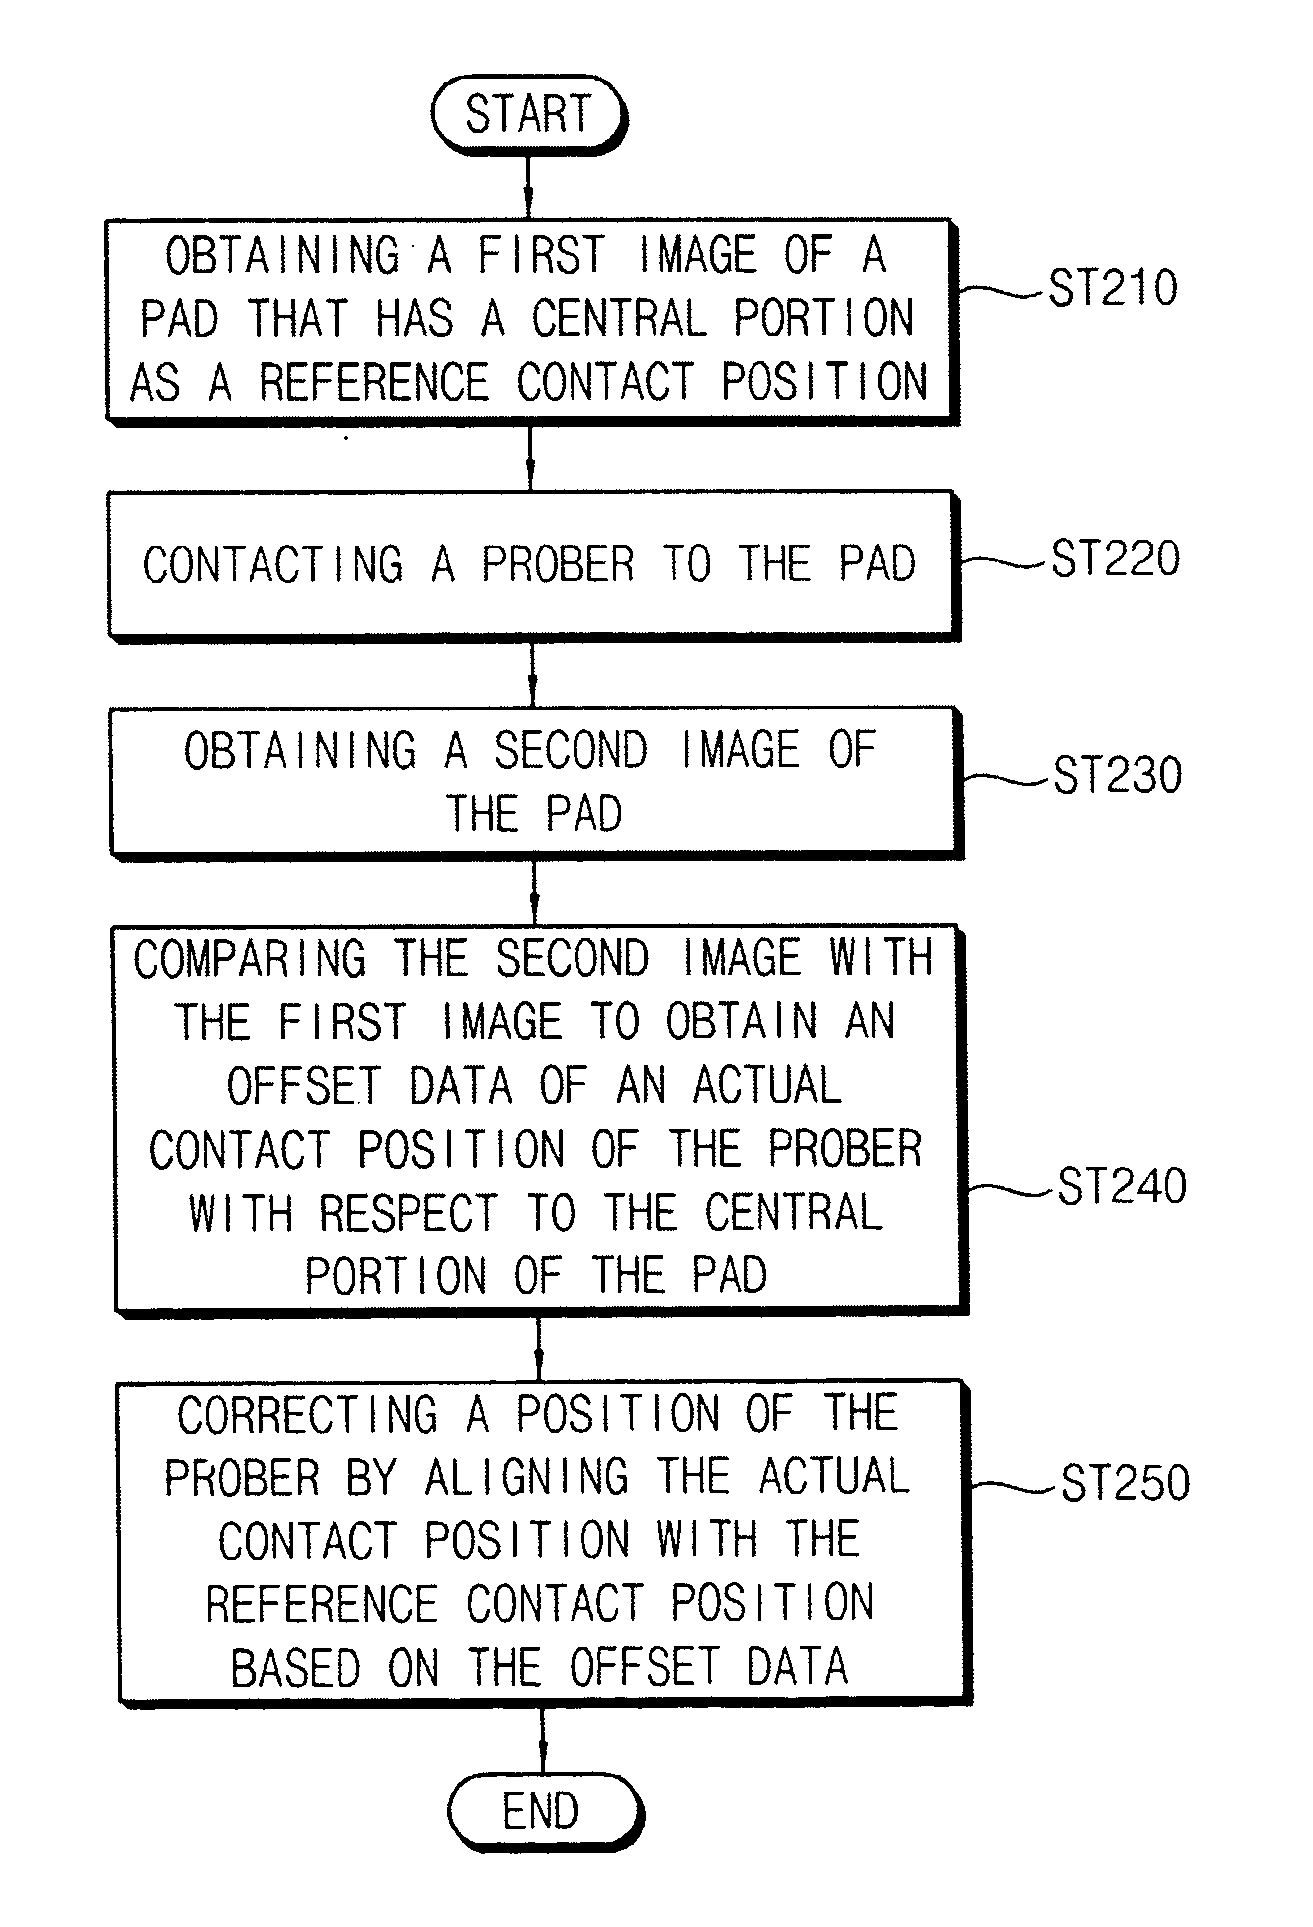 Method of correcting a position of a prober